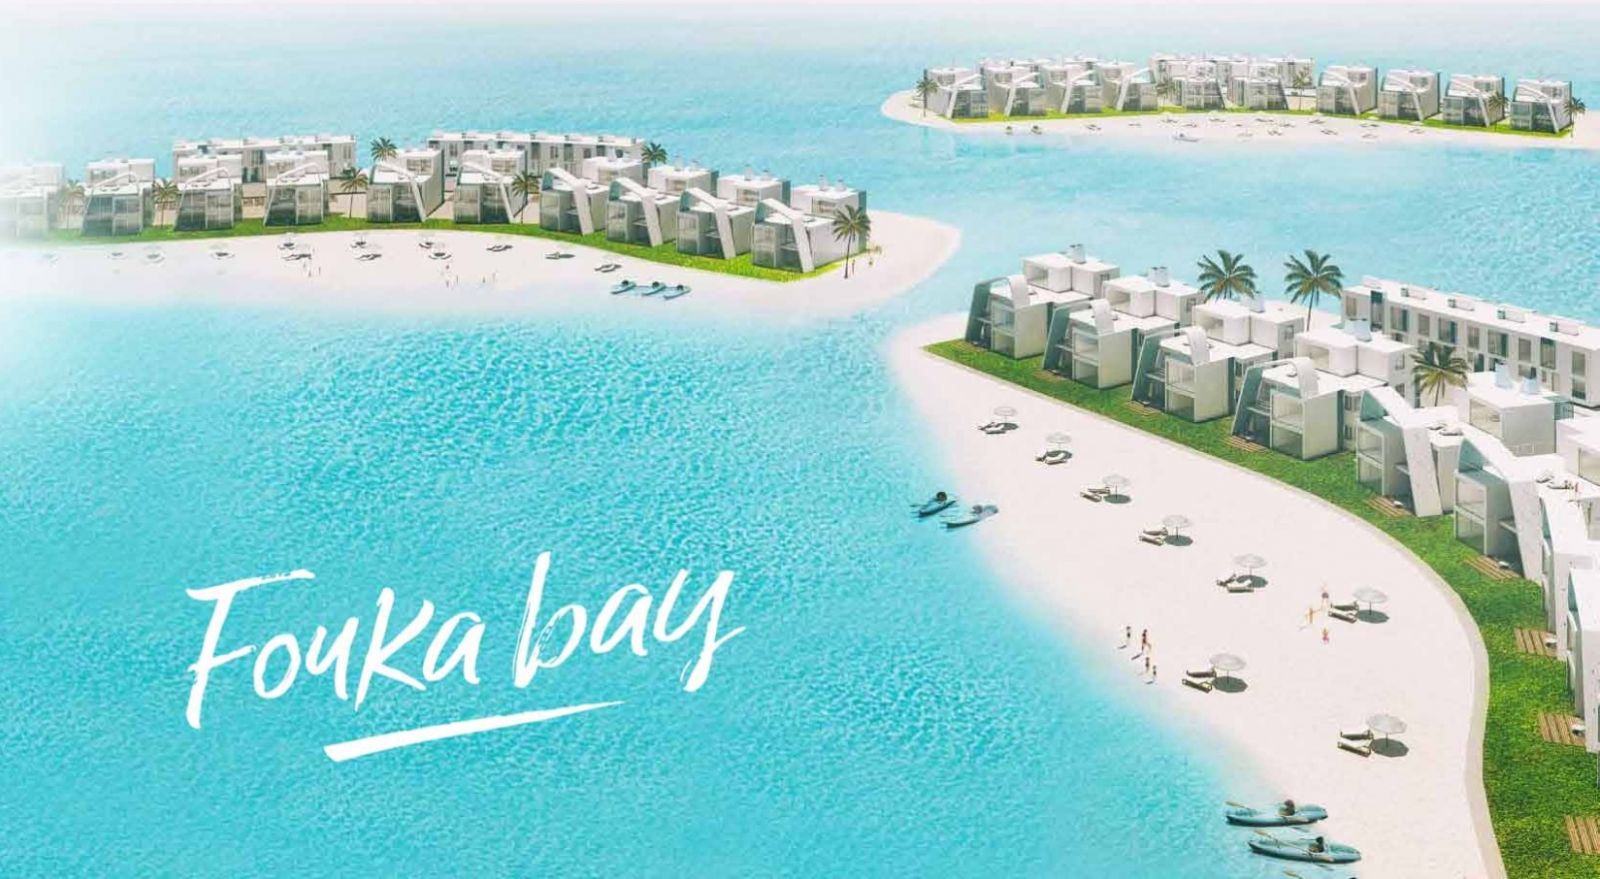 features of Fouka Bay Tatweer Misr